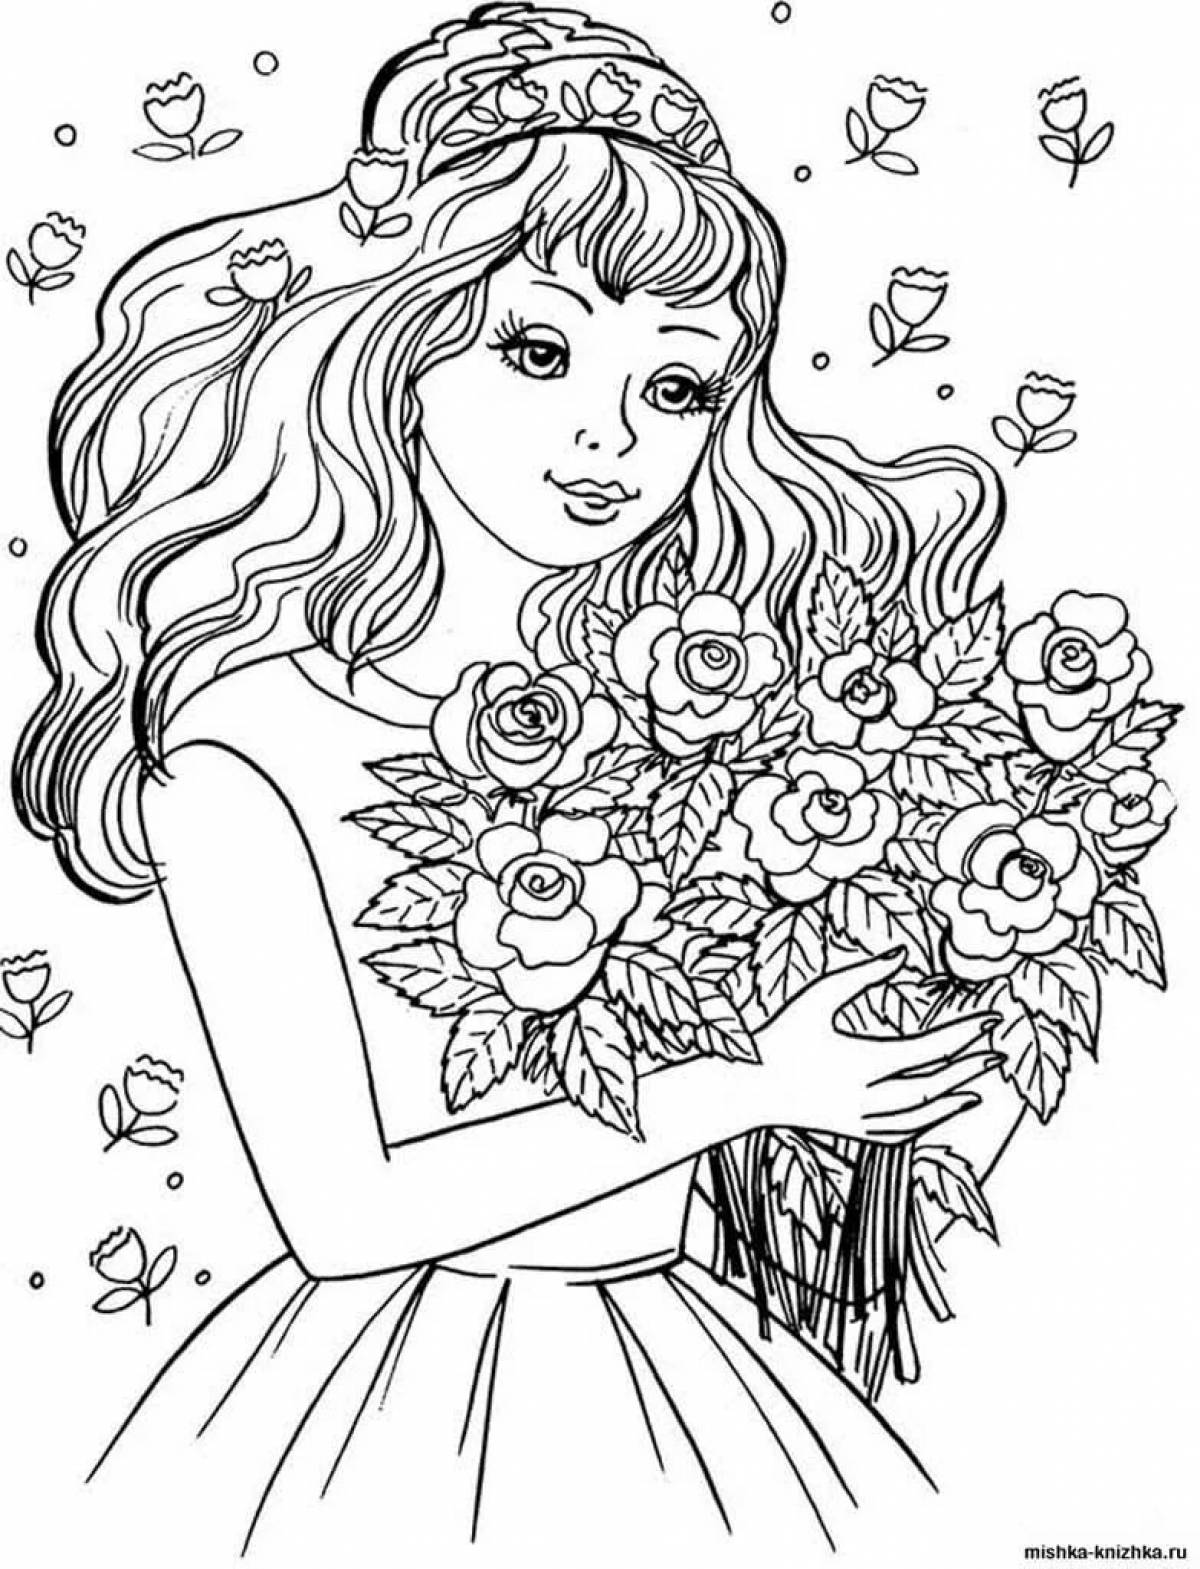 Live coloring find for girls